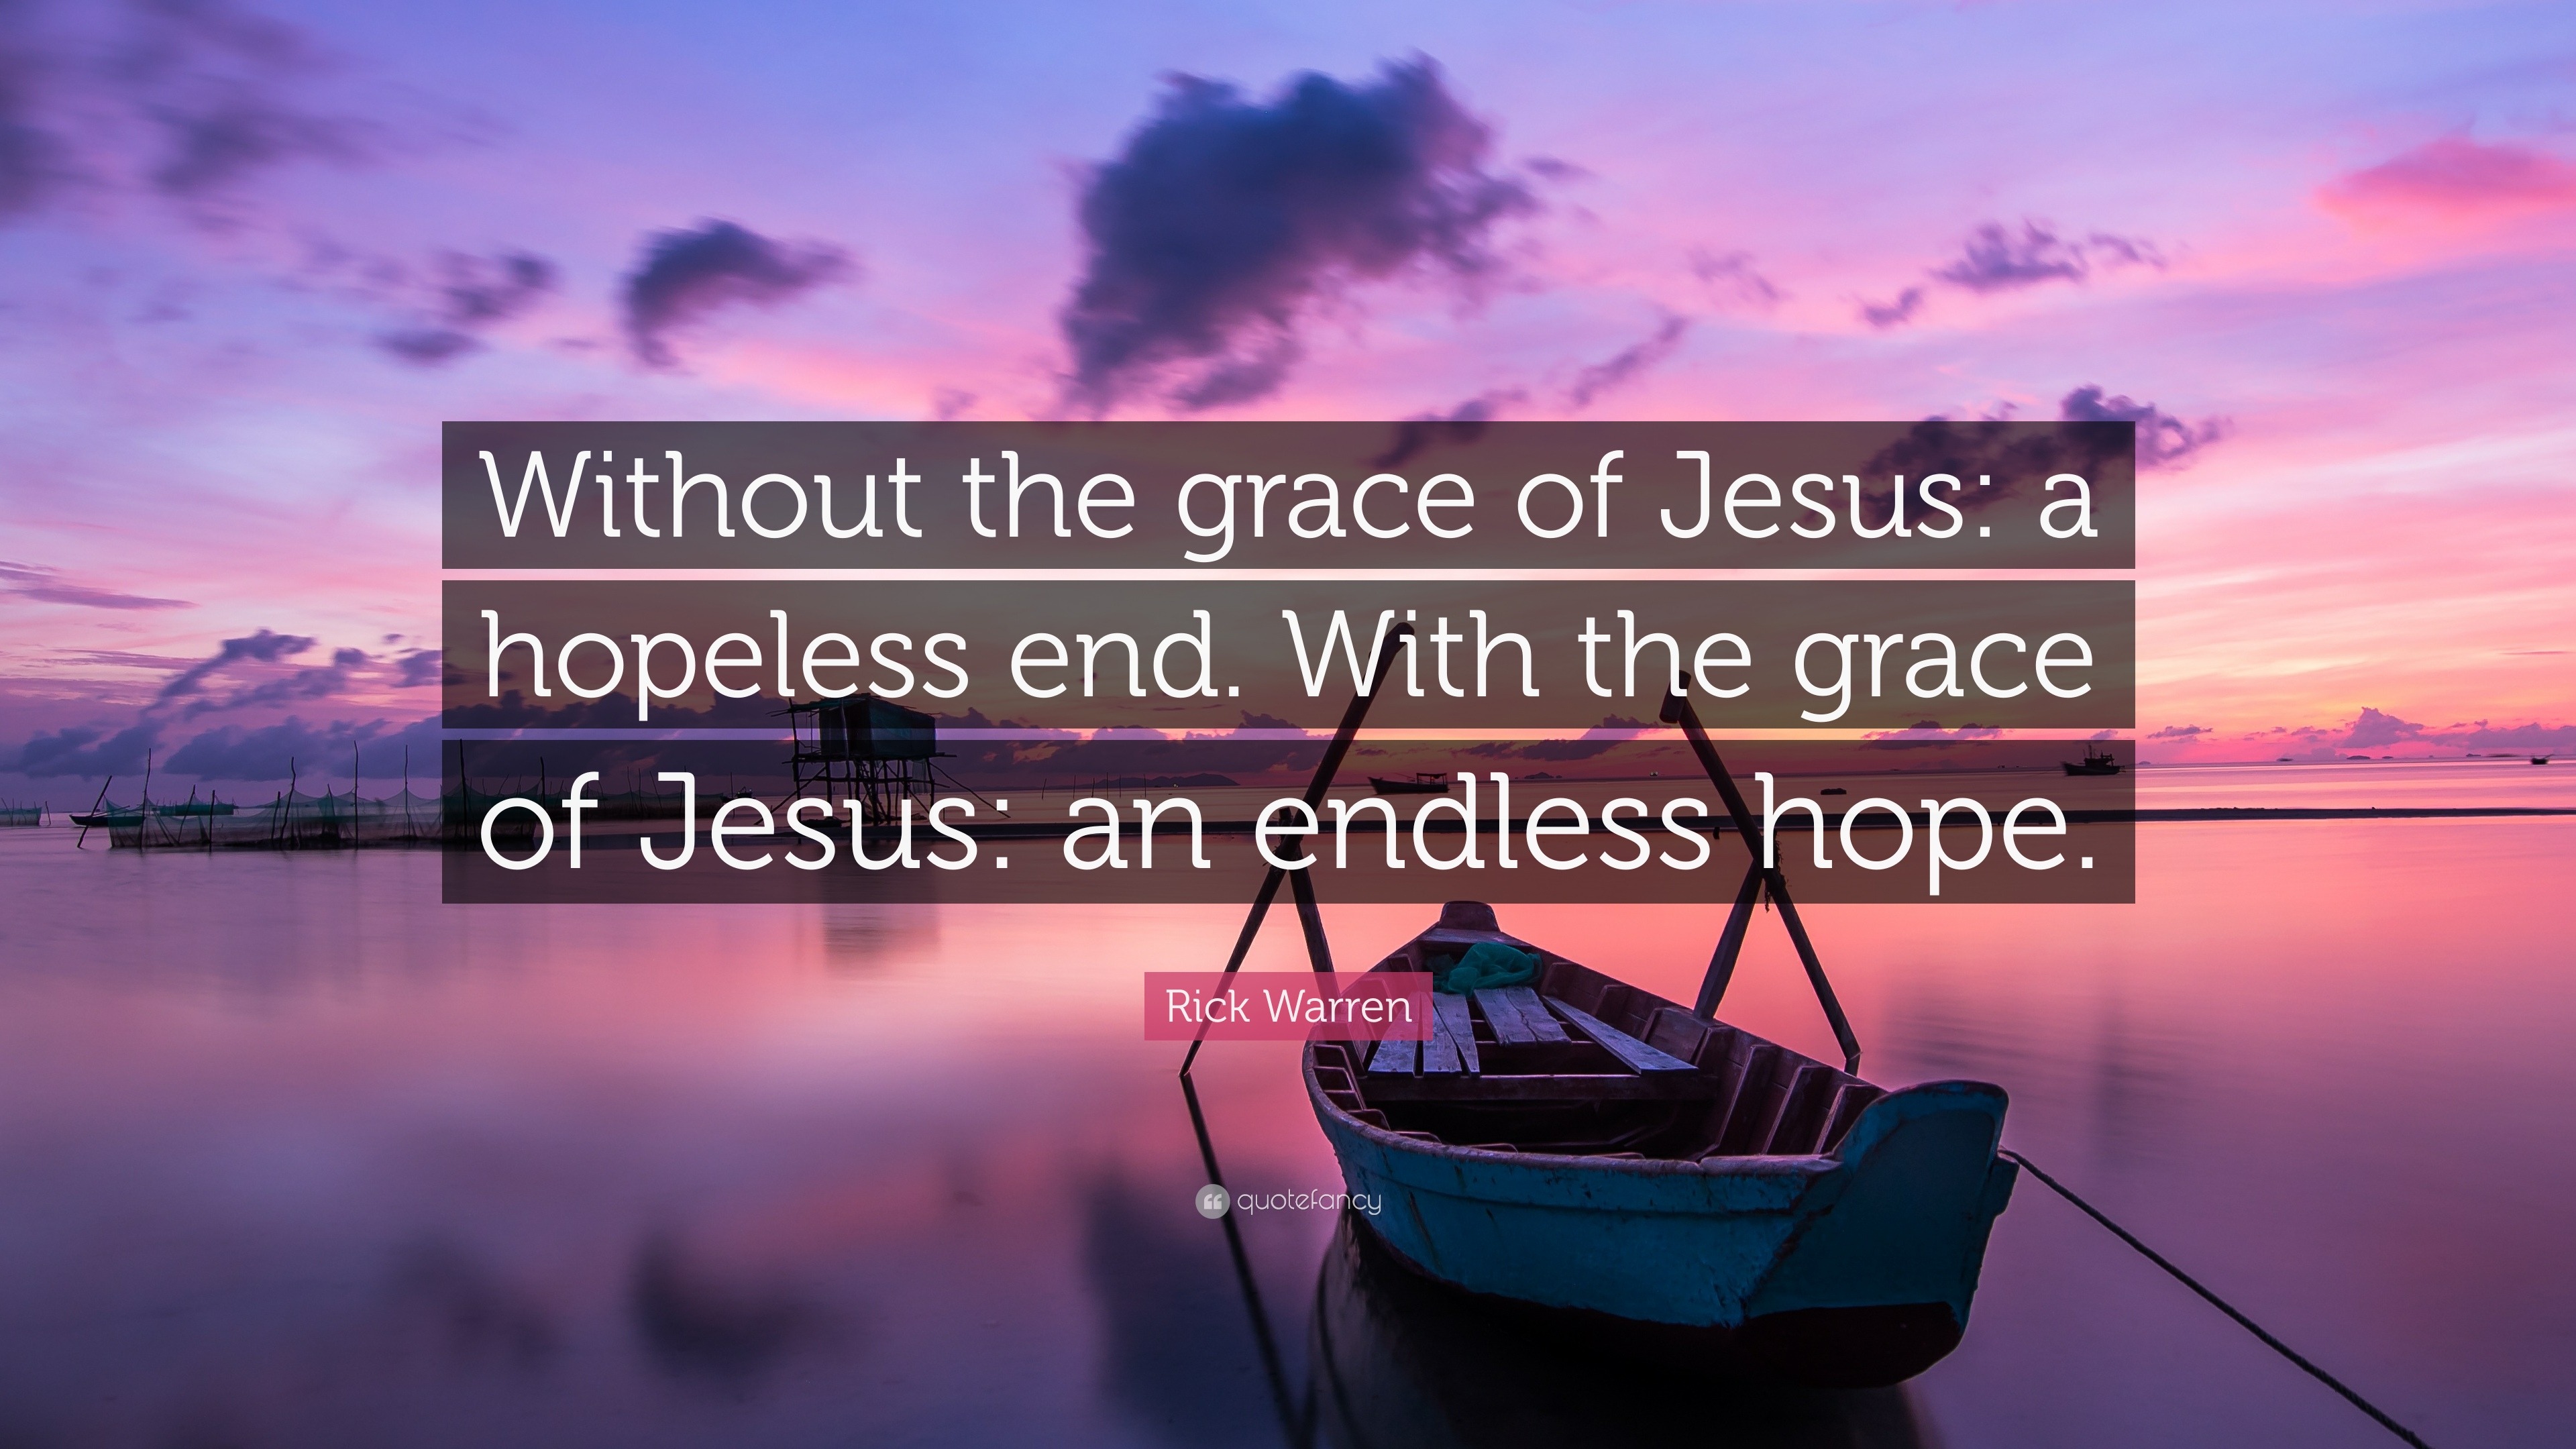 Rick Warren Quote: “Without the grace of Jesus: a hopeless end. With ...